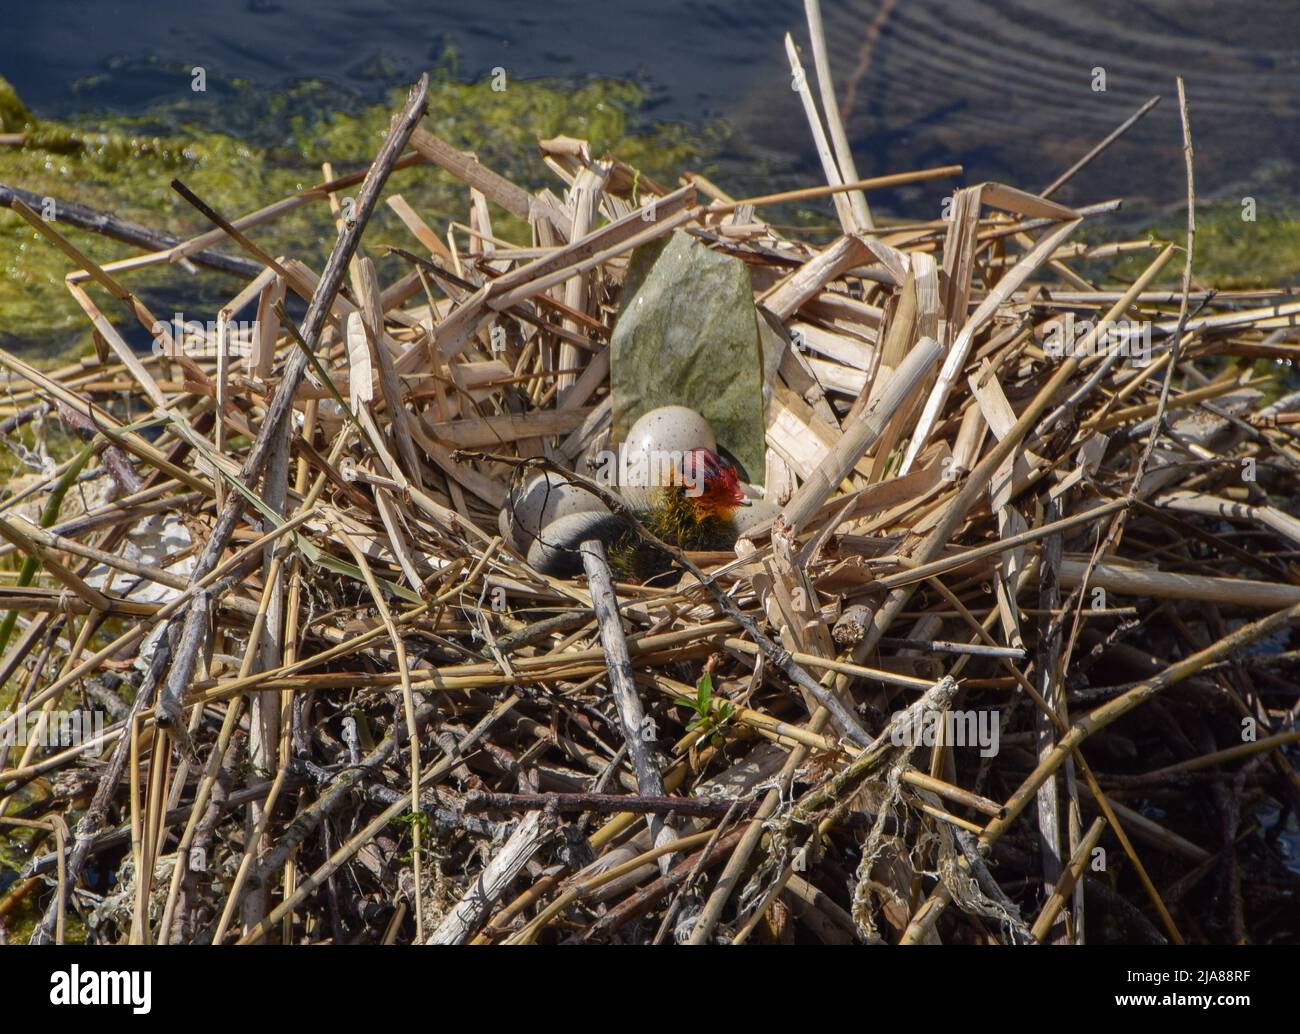 London, UK. 28th May 2022. A eurasian coot (Fulica atra) chick and eggs in a nest in Kensington Gardens. The mother left briefly and returned a few minutes later. Credit: Vuk Valcic/Alamy Live News Stock Photo